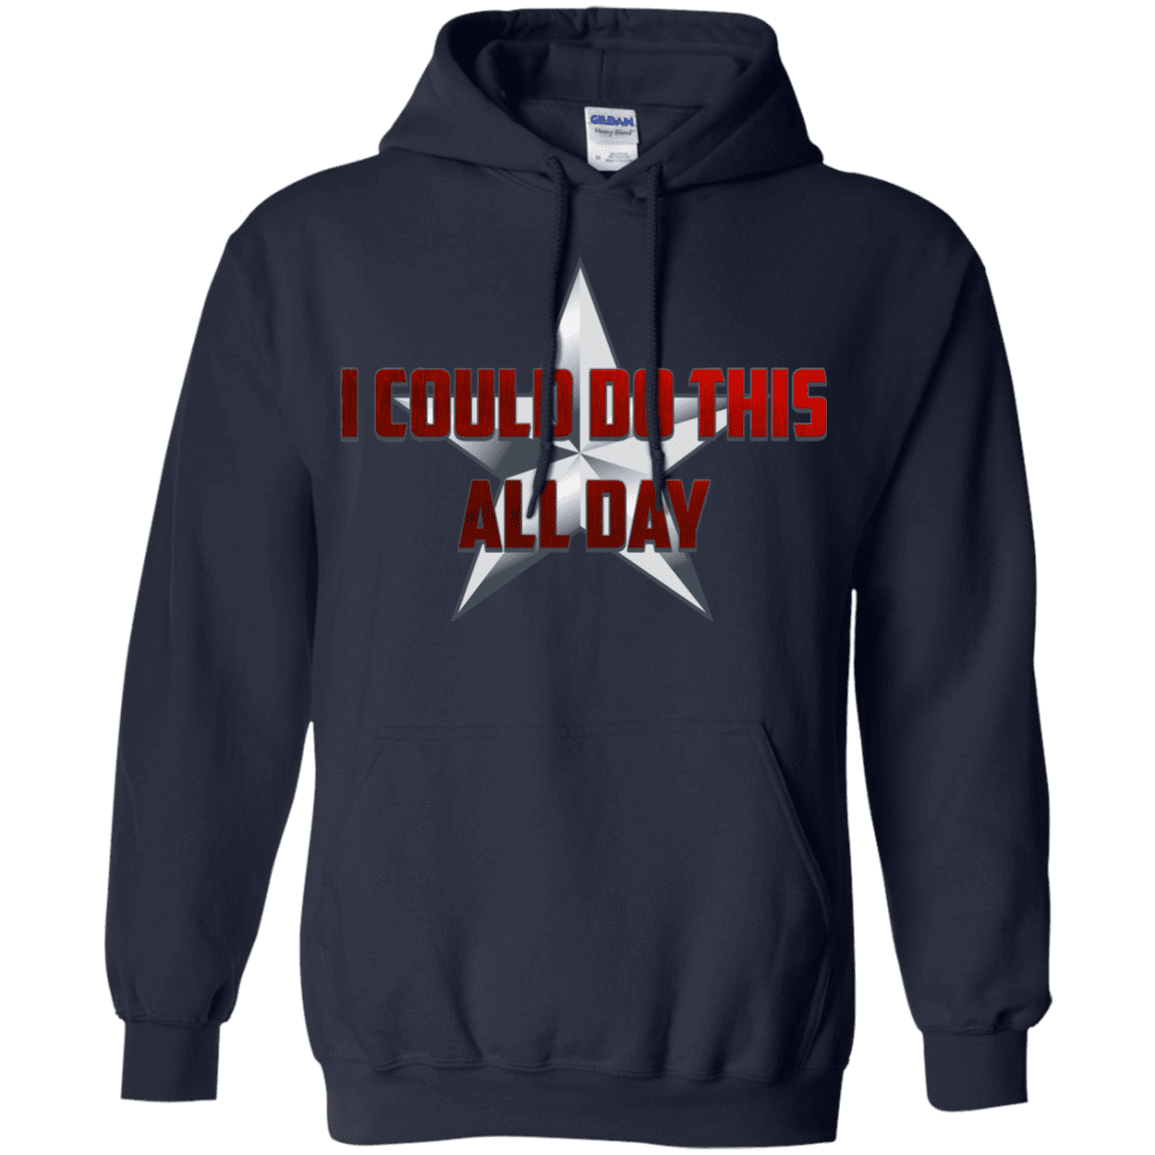 Sweatshirts Navy / S All Day Pullover Hoodie